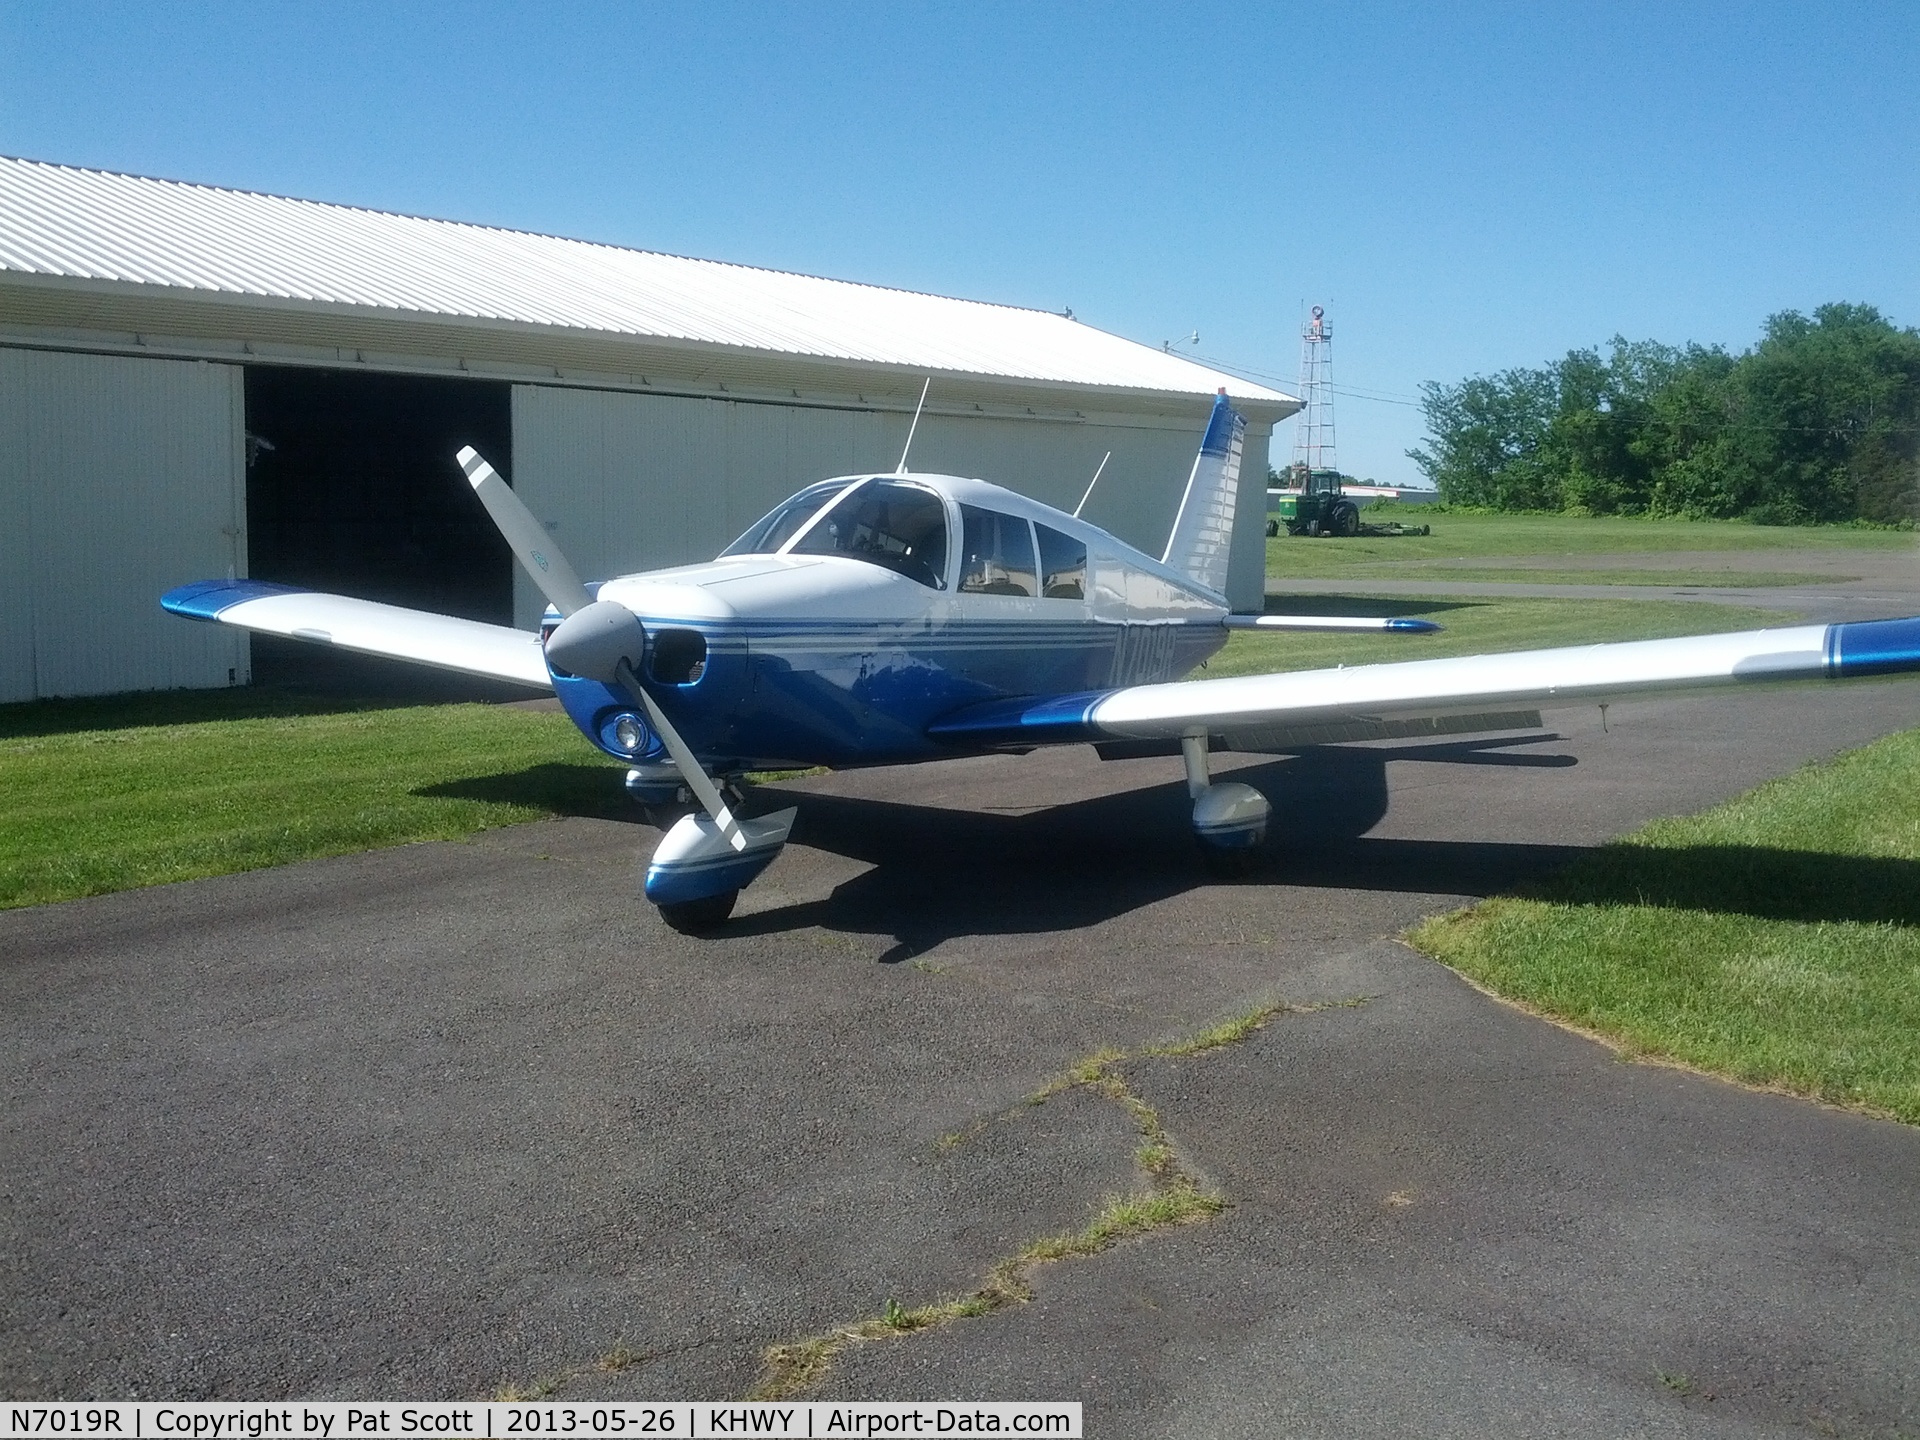 N7019R, 1966 Piper PA-28-140 Cherokee C/N 28-21714, Just finished giving a bath.  Bought plane in ~2006 and did a total refurbishment:  Overhauled engine w/ 160HP STC, paint, windows, interior and avionics.